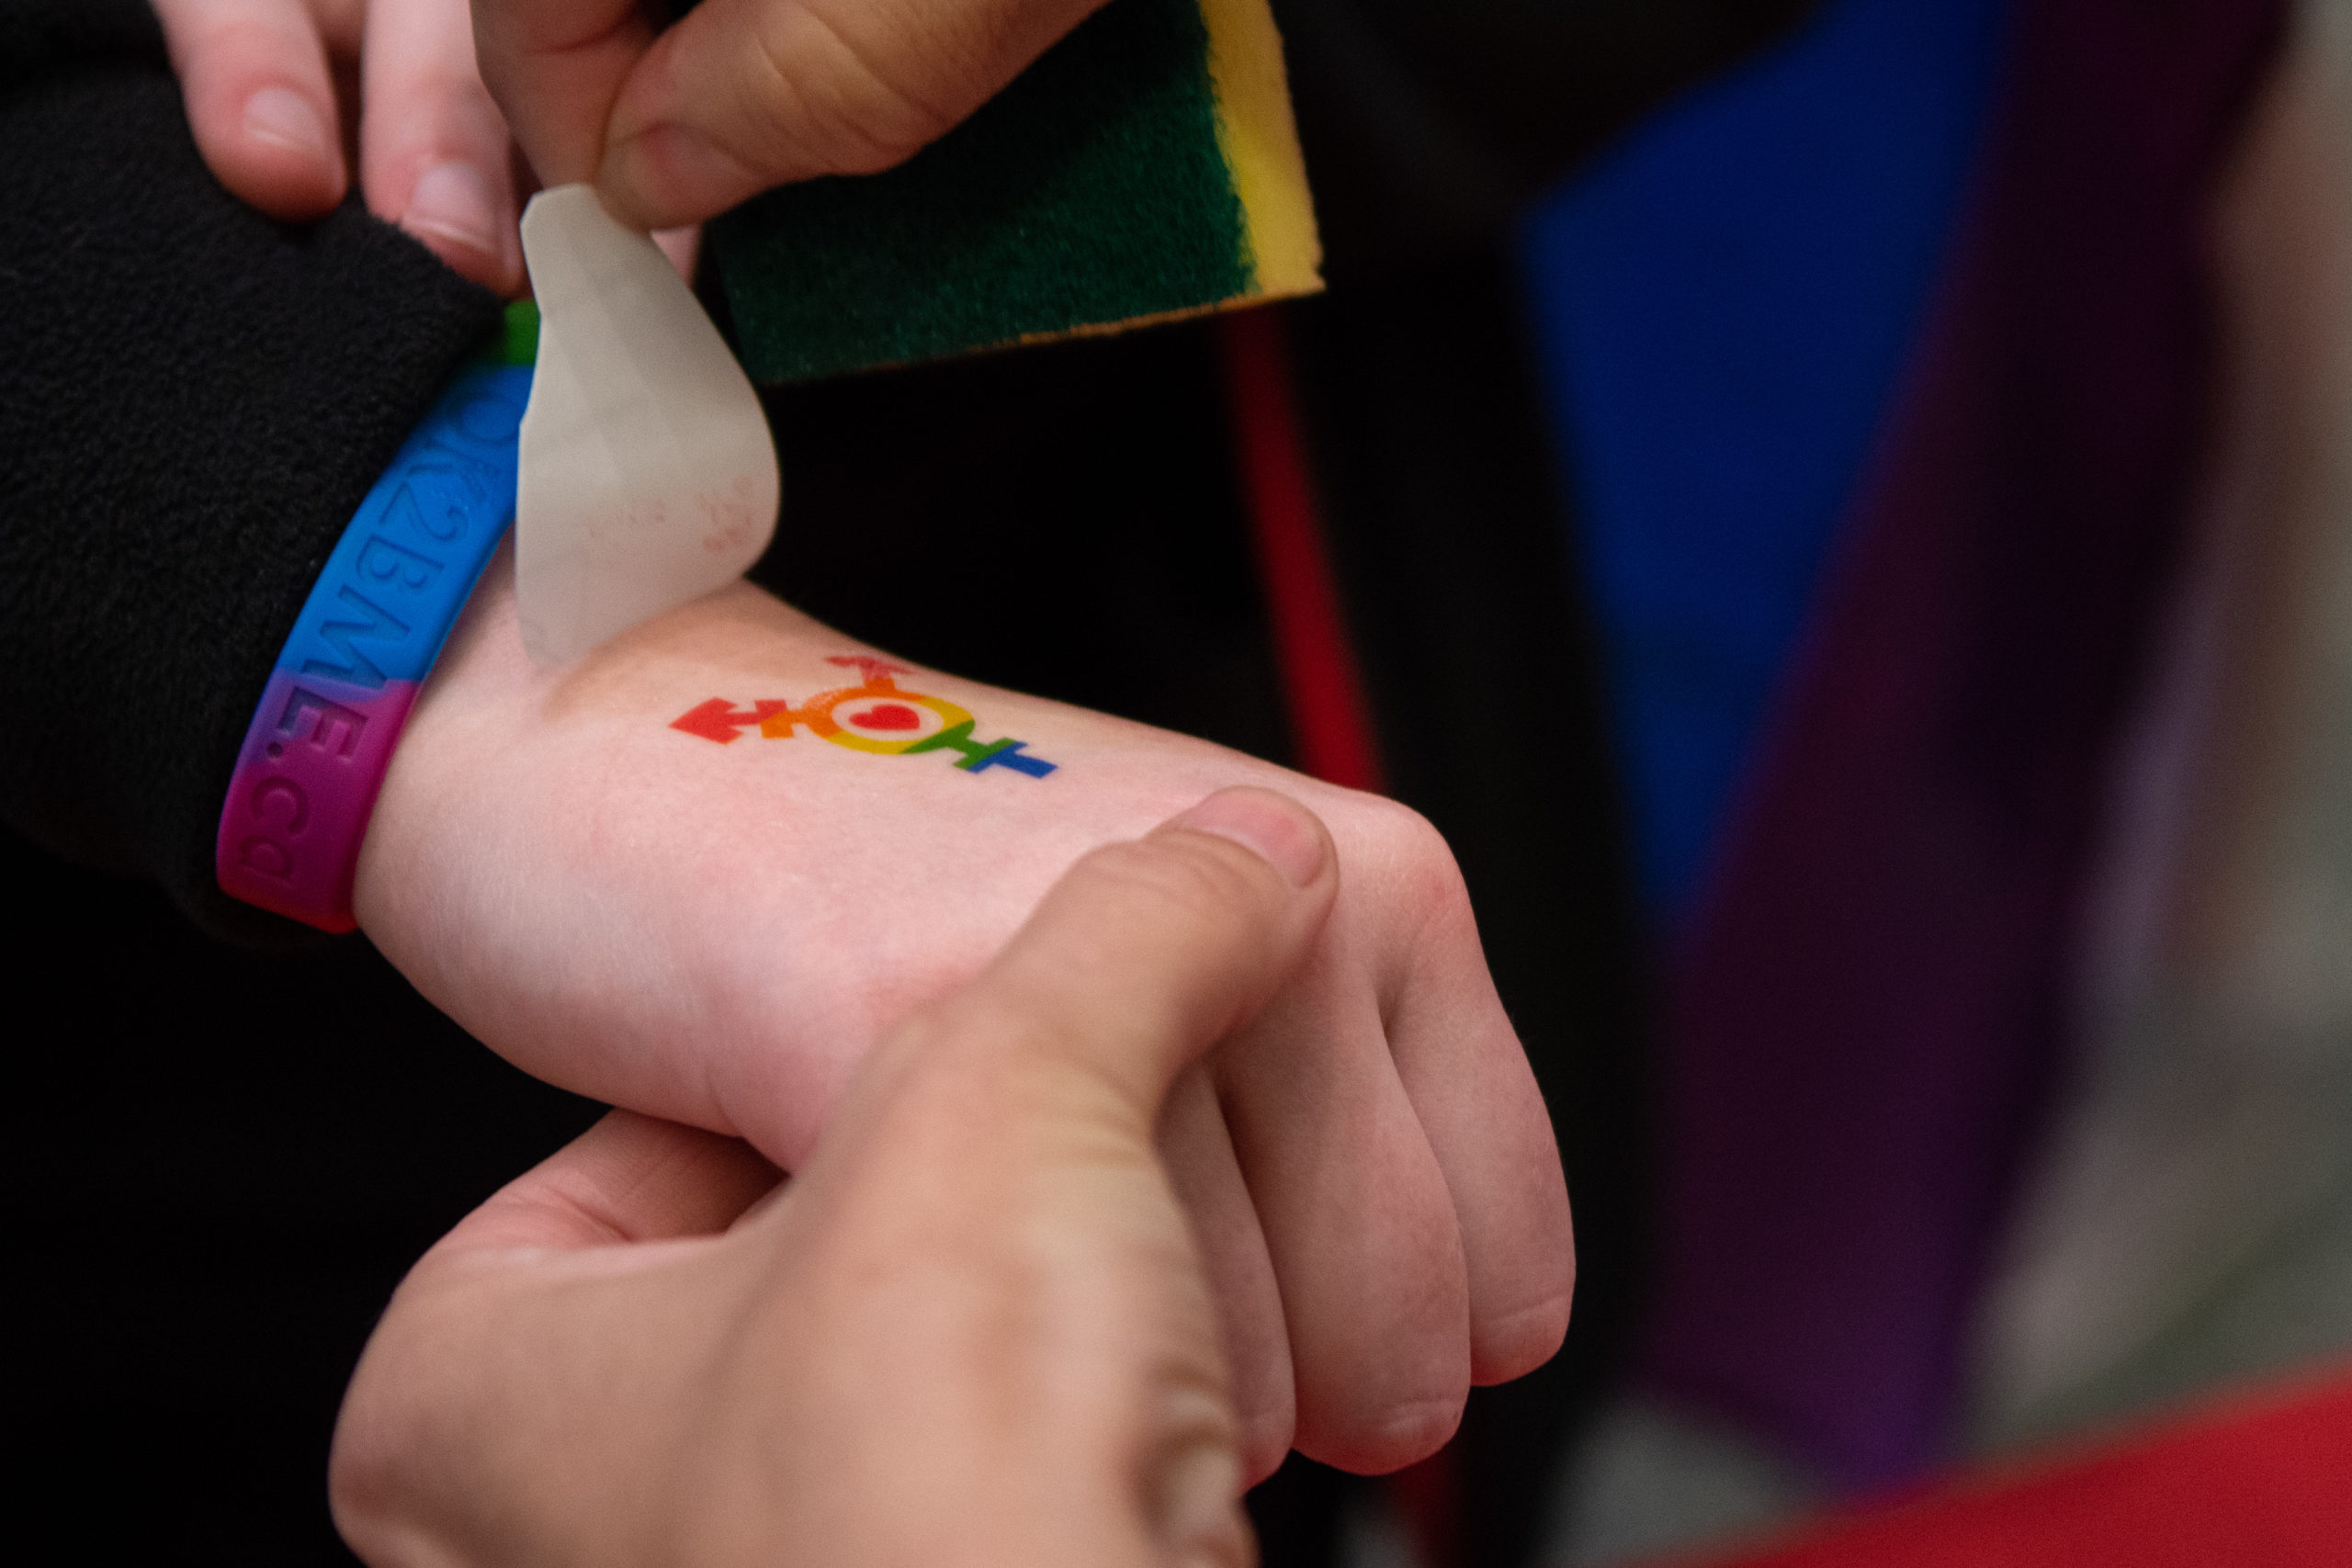 A temporary Pride-themed tattoo is applied to a hand.